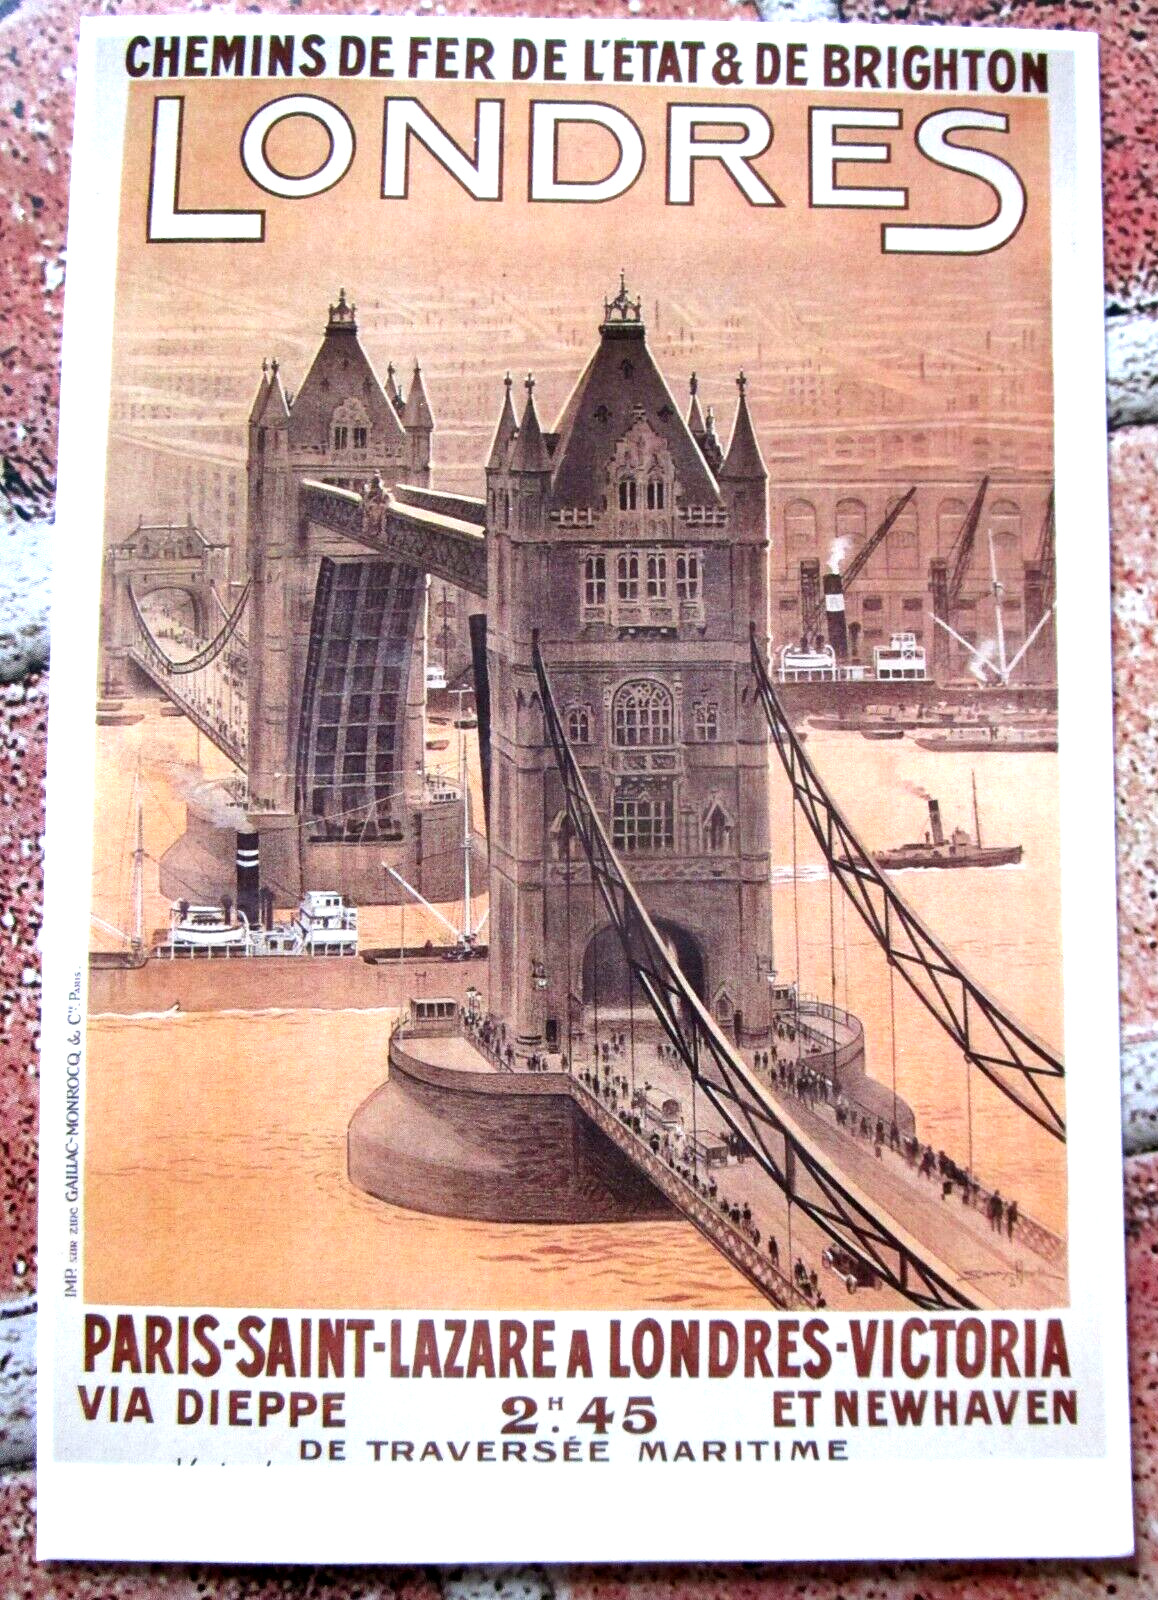 London Tower Bridge Postcard French Connection Poster Reproduction Mayfair Cards